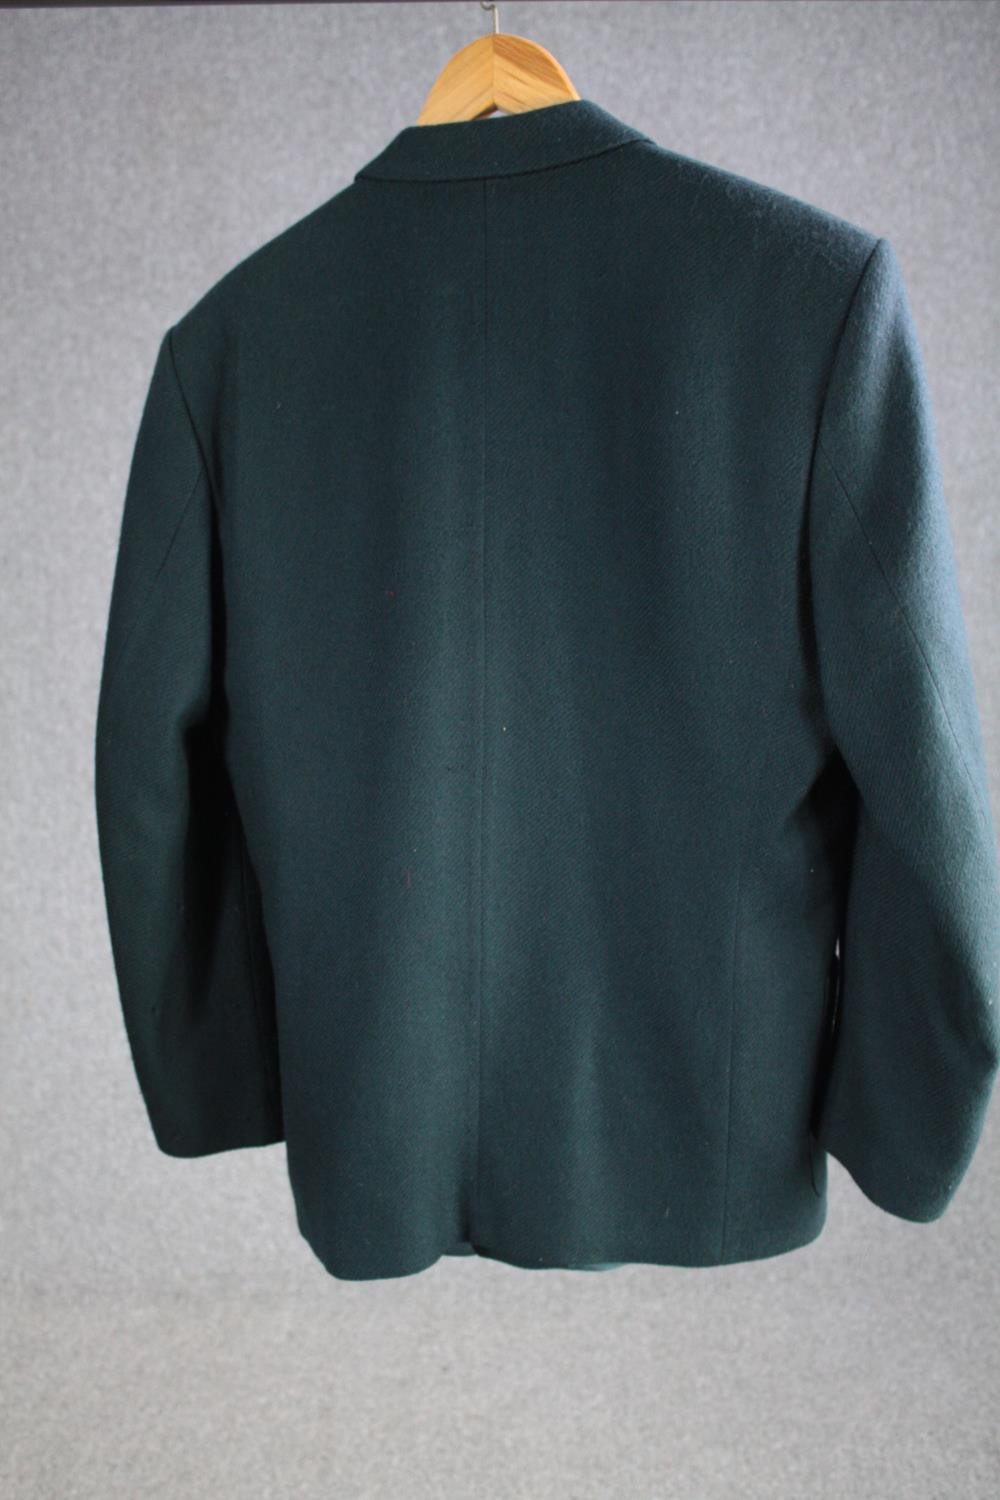 A vintage bespoke made teal silk mix jacket with mother of pearl buttons and maker's label. - Image 4 of 5